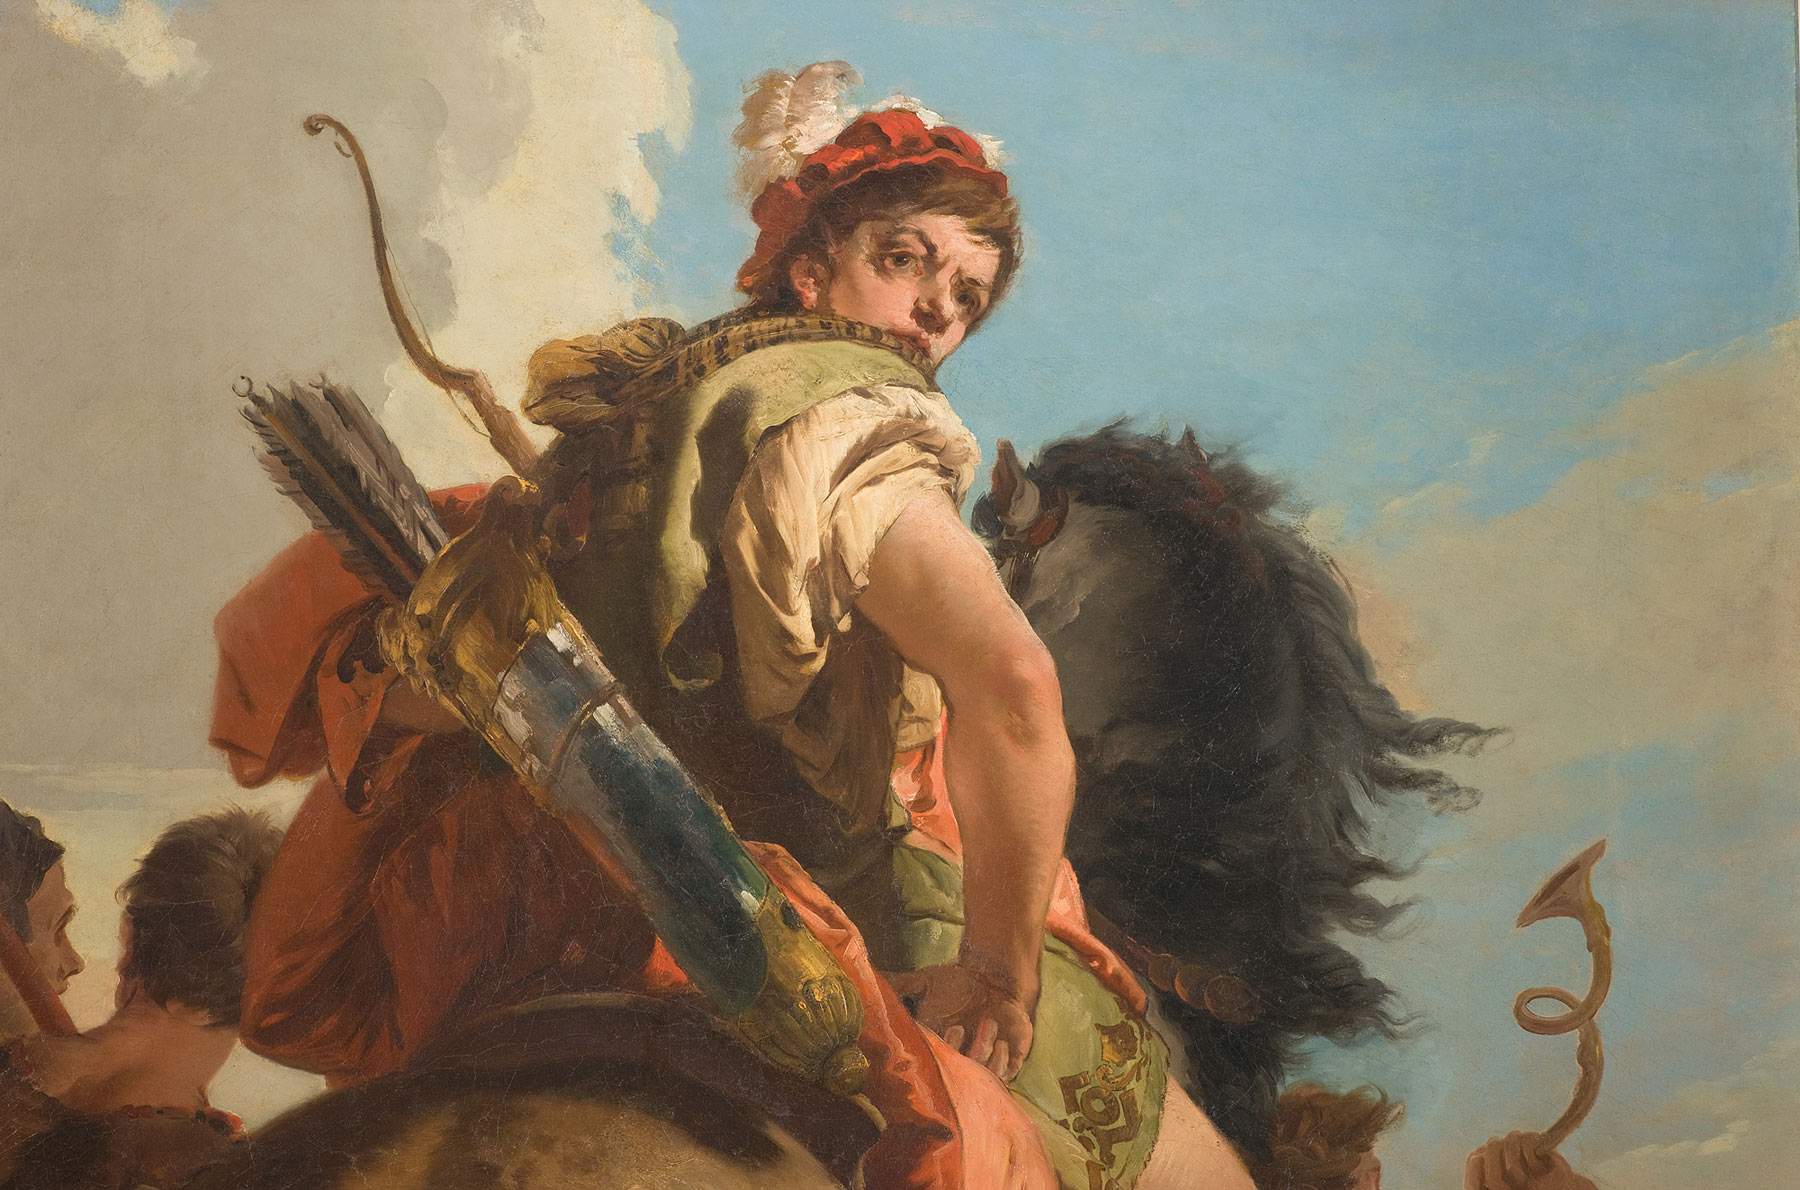 A major exhibition on Giambattista Tiepolo is coming to Milan in 2020.